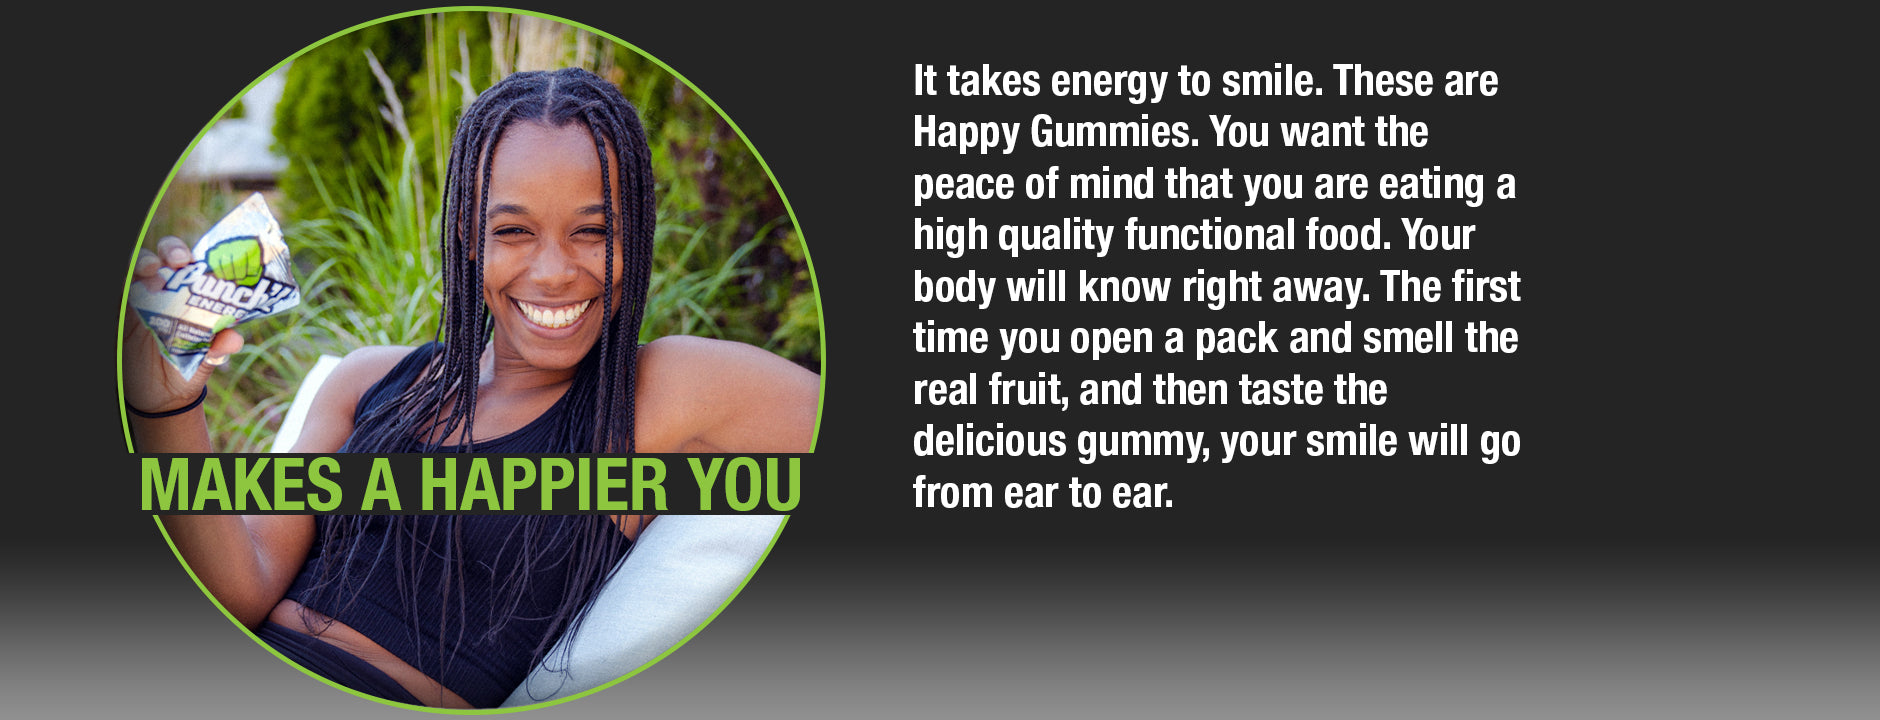 Punch'd Energy Makes A Happier You